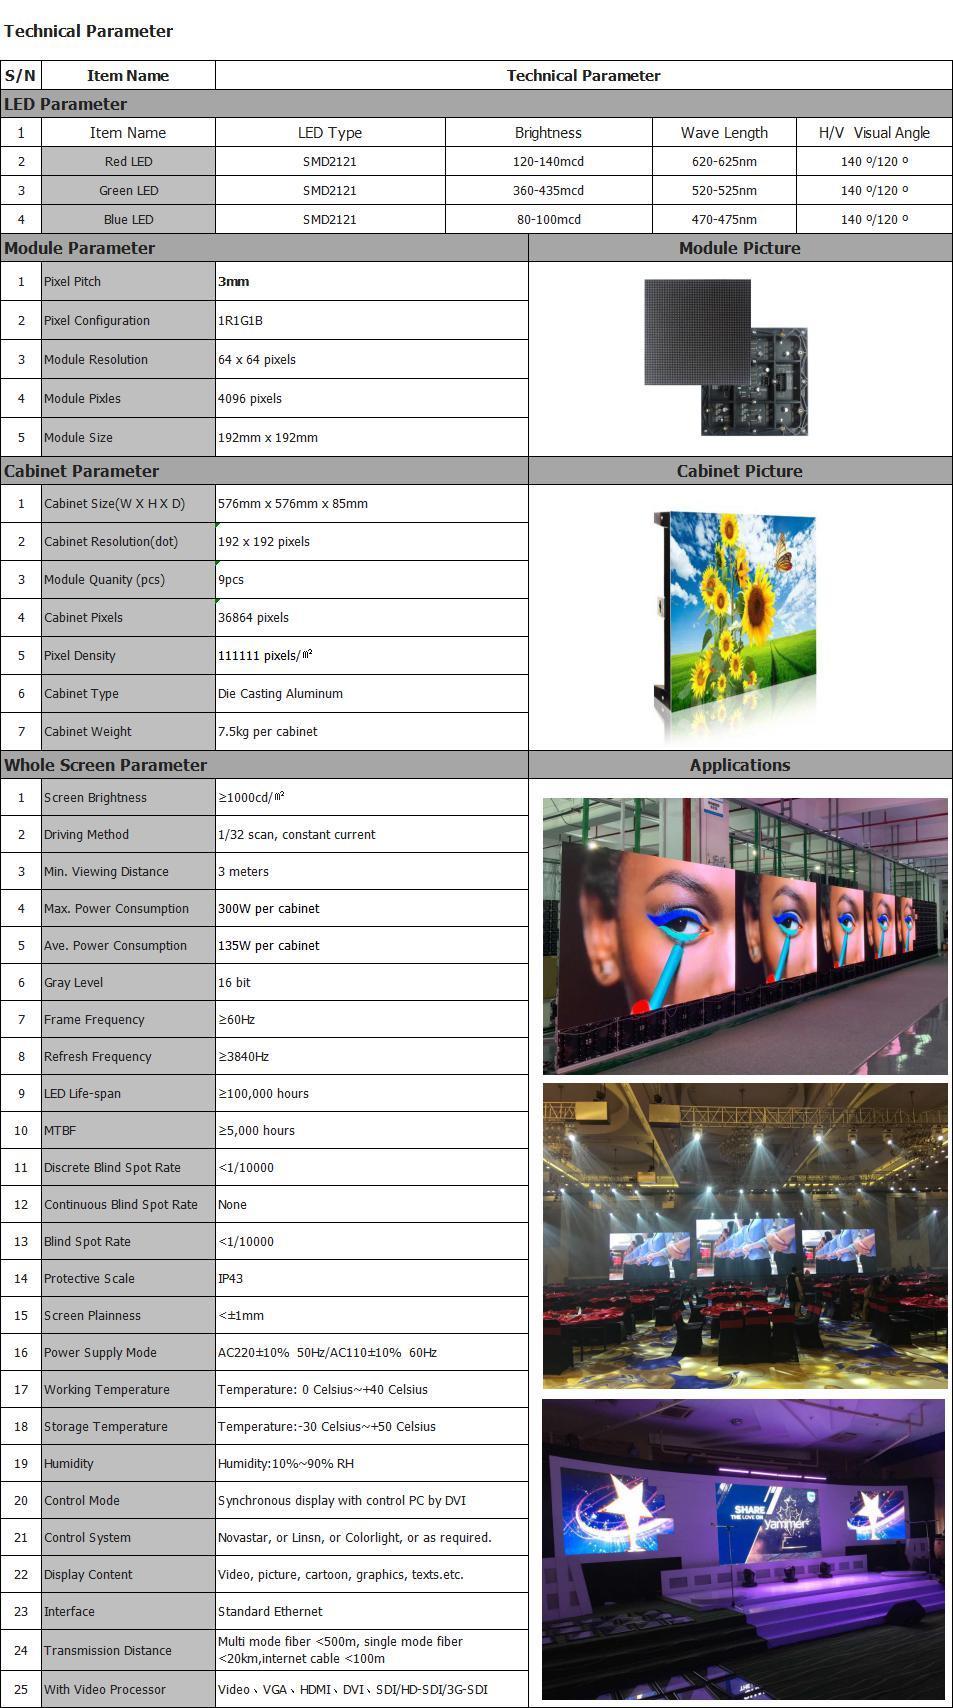 3840Hz Full Color LED Display Screens for Permanent Installation at Auditorium